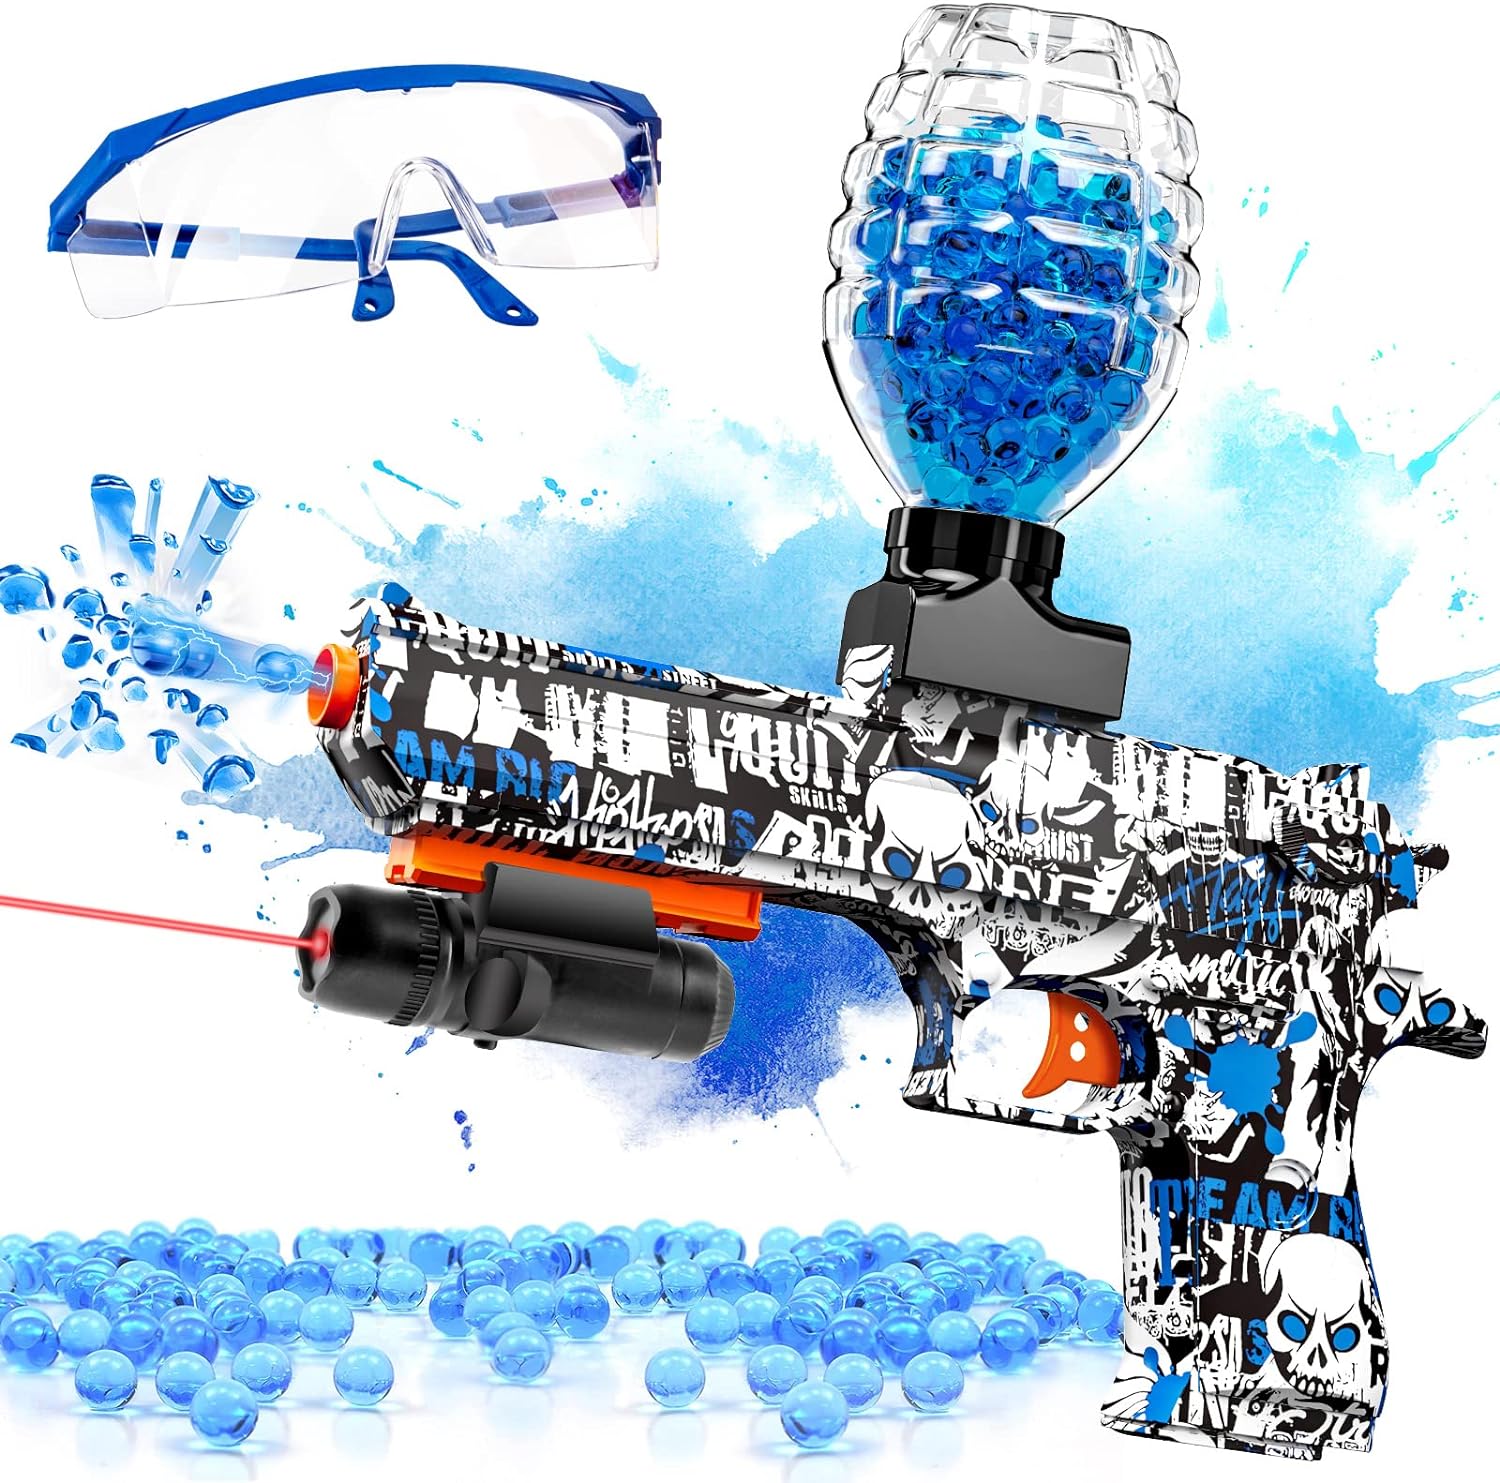 An Automatic Electric Gel Ball Blaster for Kids, featuring blue bubbles and a pair of goggles.